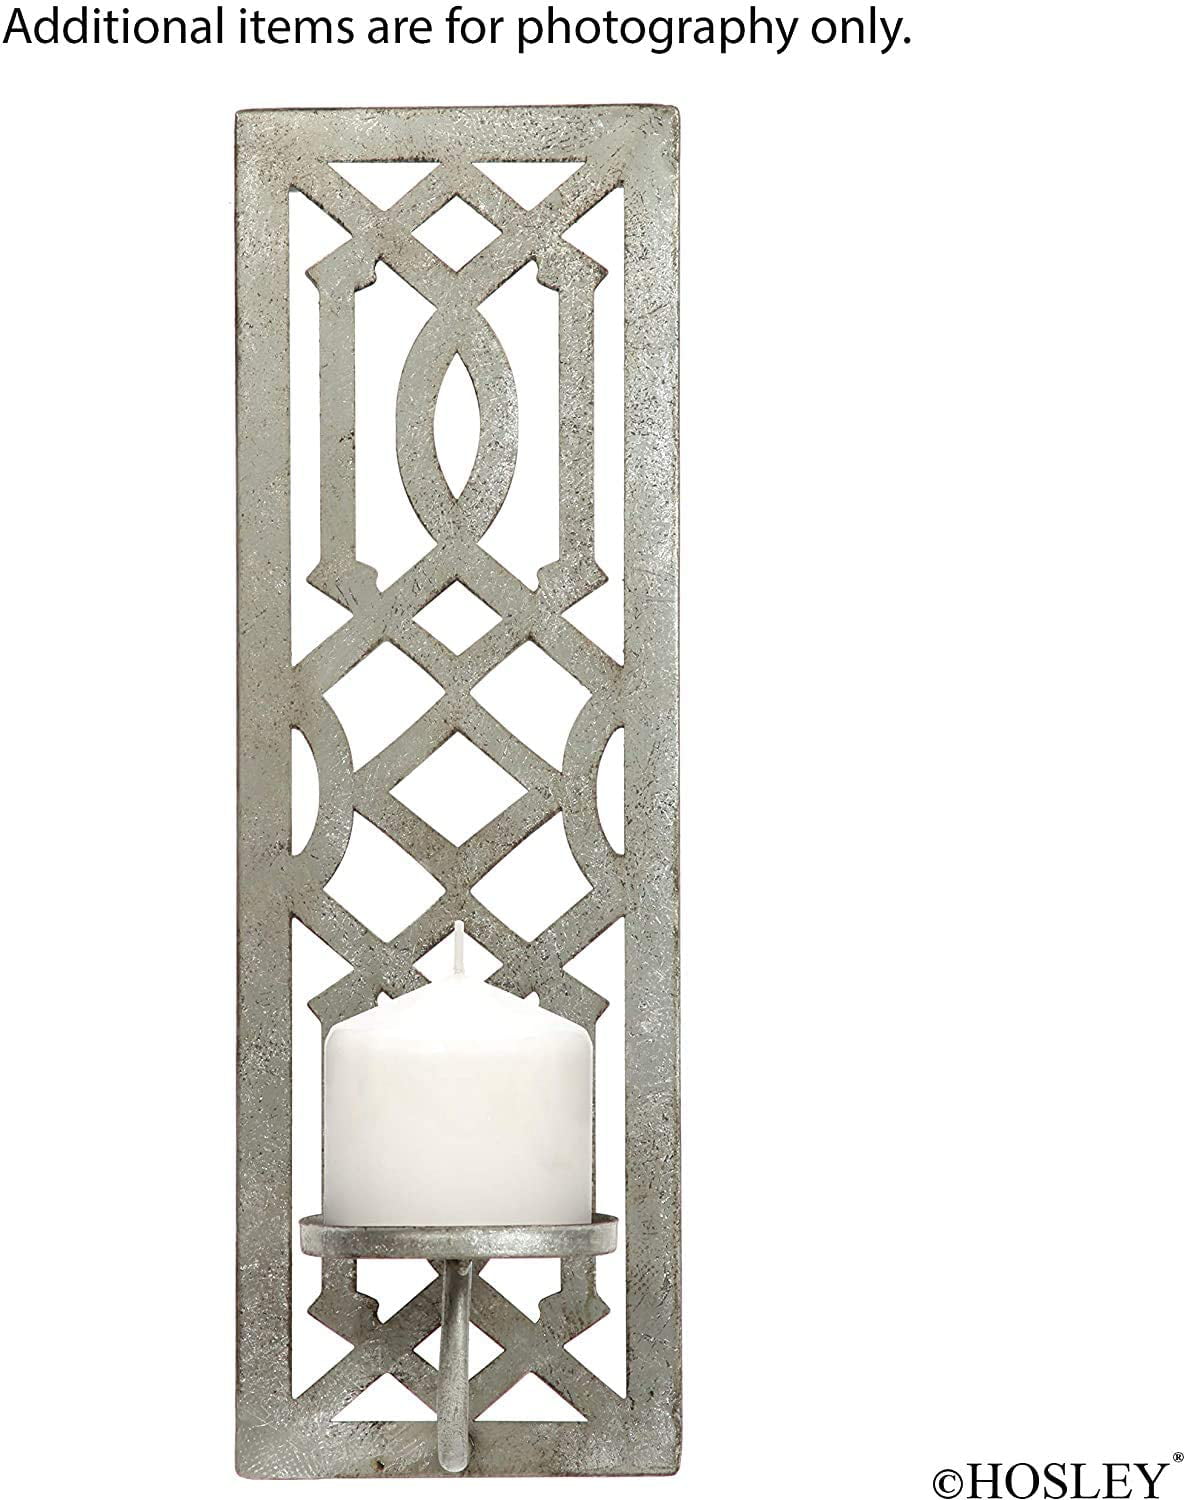 Gardens O4 Ideal Gift Wedding Special Occasions Home Office Spa Aromatherapy Hosley Set of 2 Iron Wall Pillar Candle Sconce 16.5 Inch High Mid Century Modern Silver